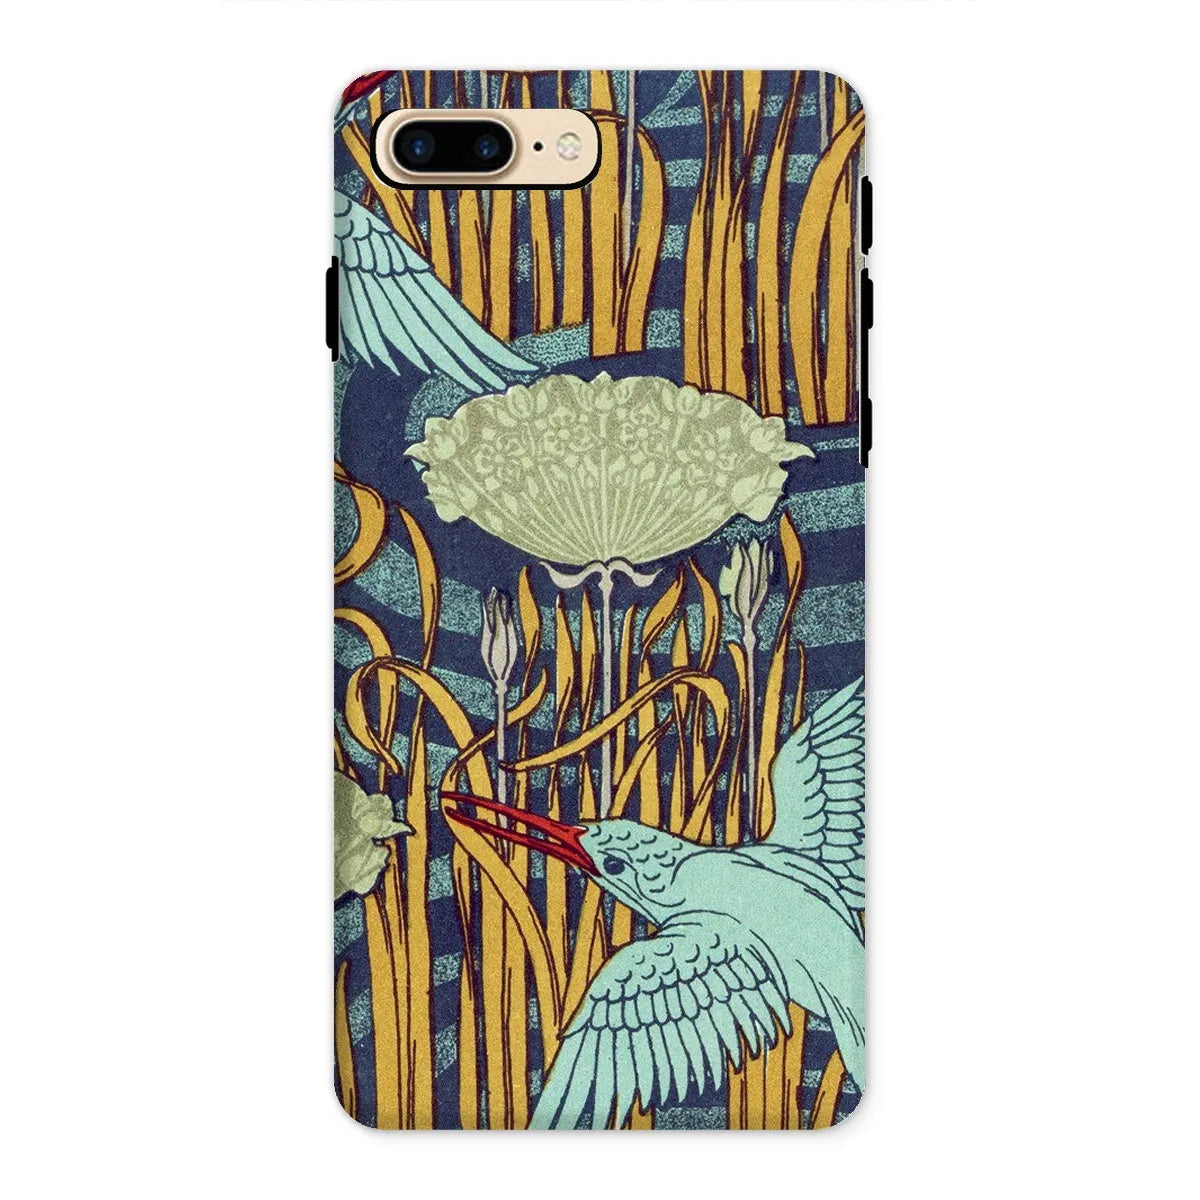 Kingfishers French Art Phone Case - Maurice Pillard Verneuil - Iphone 8 Plus / Matte - Mobile Phone Cases - Aesthetic